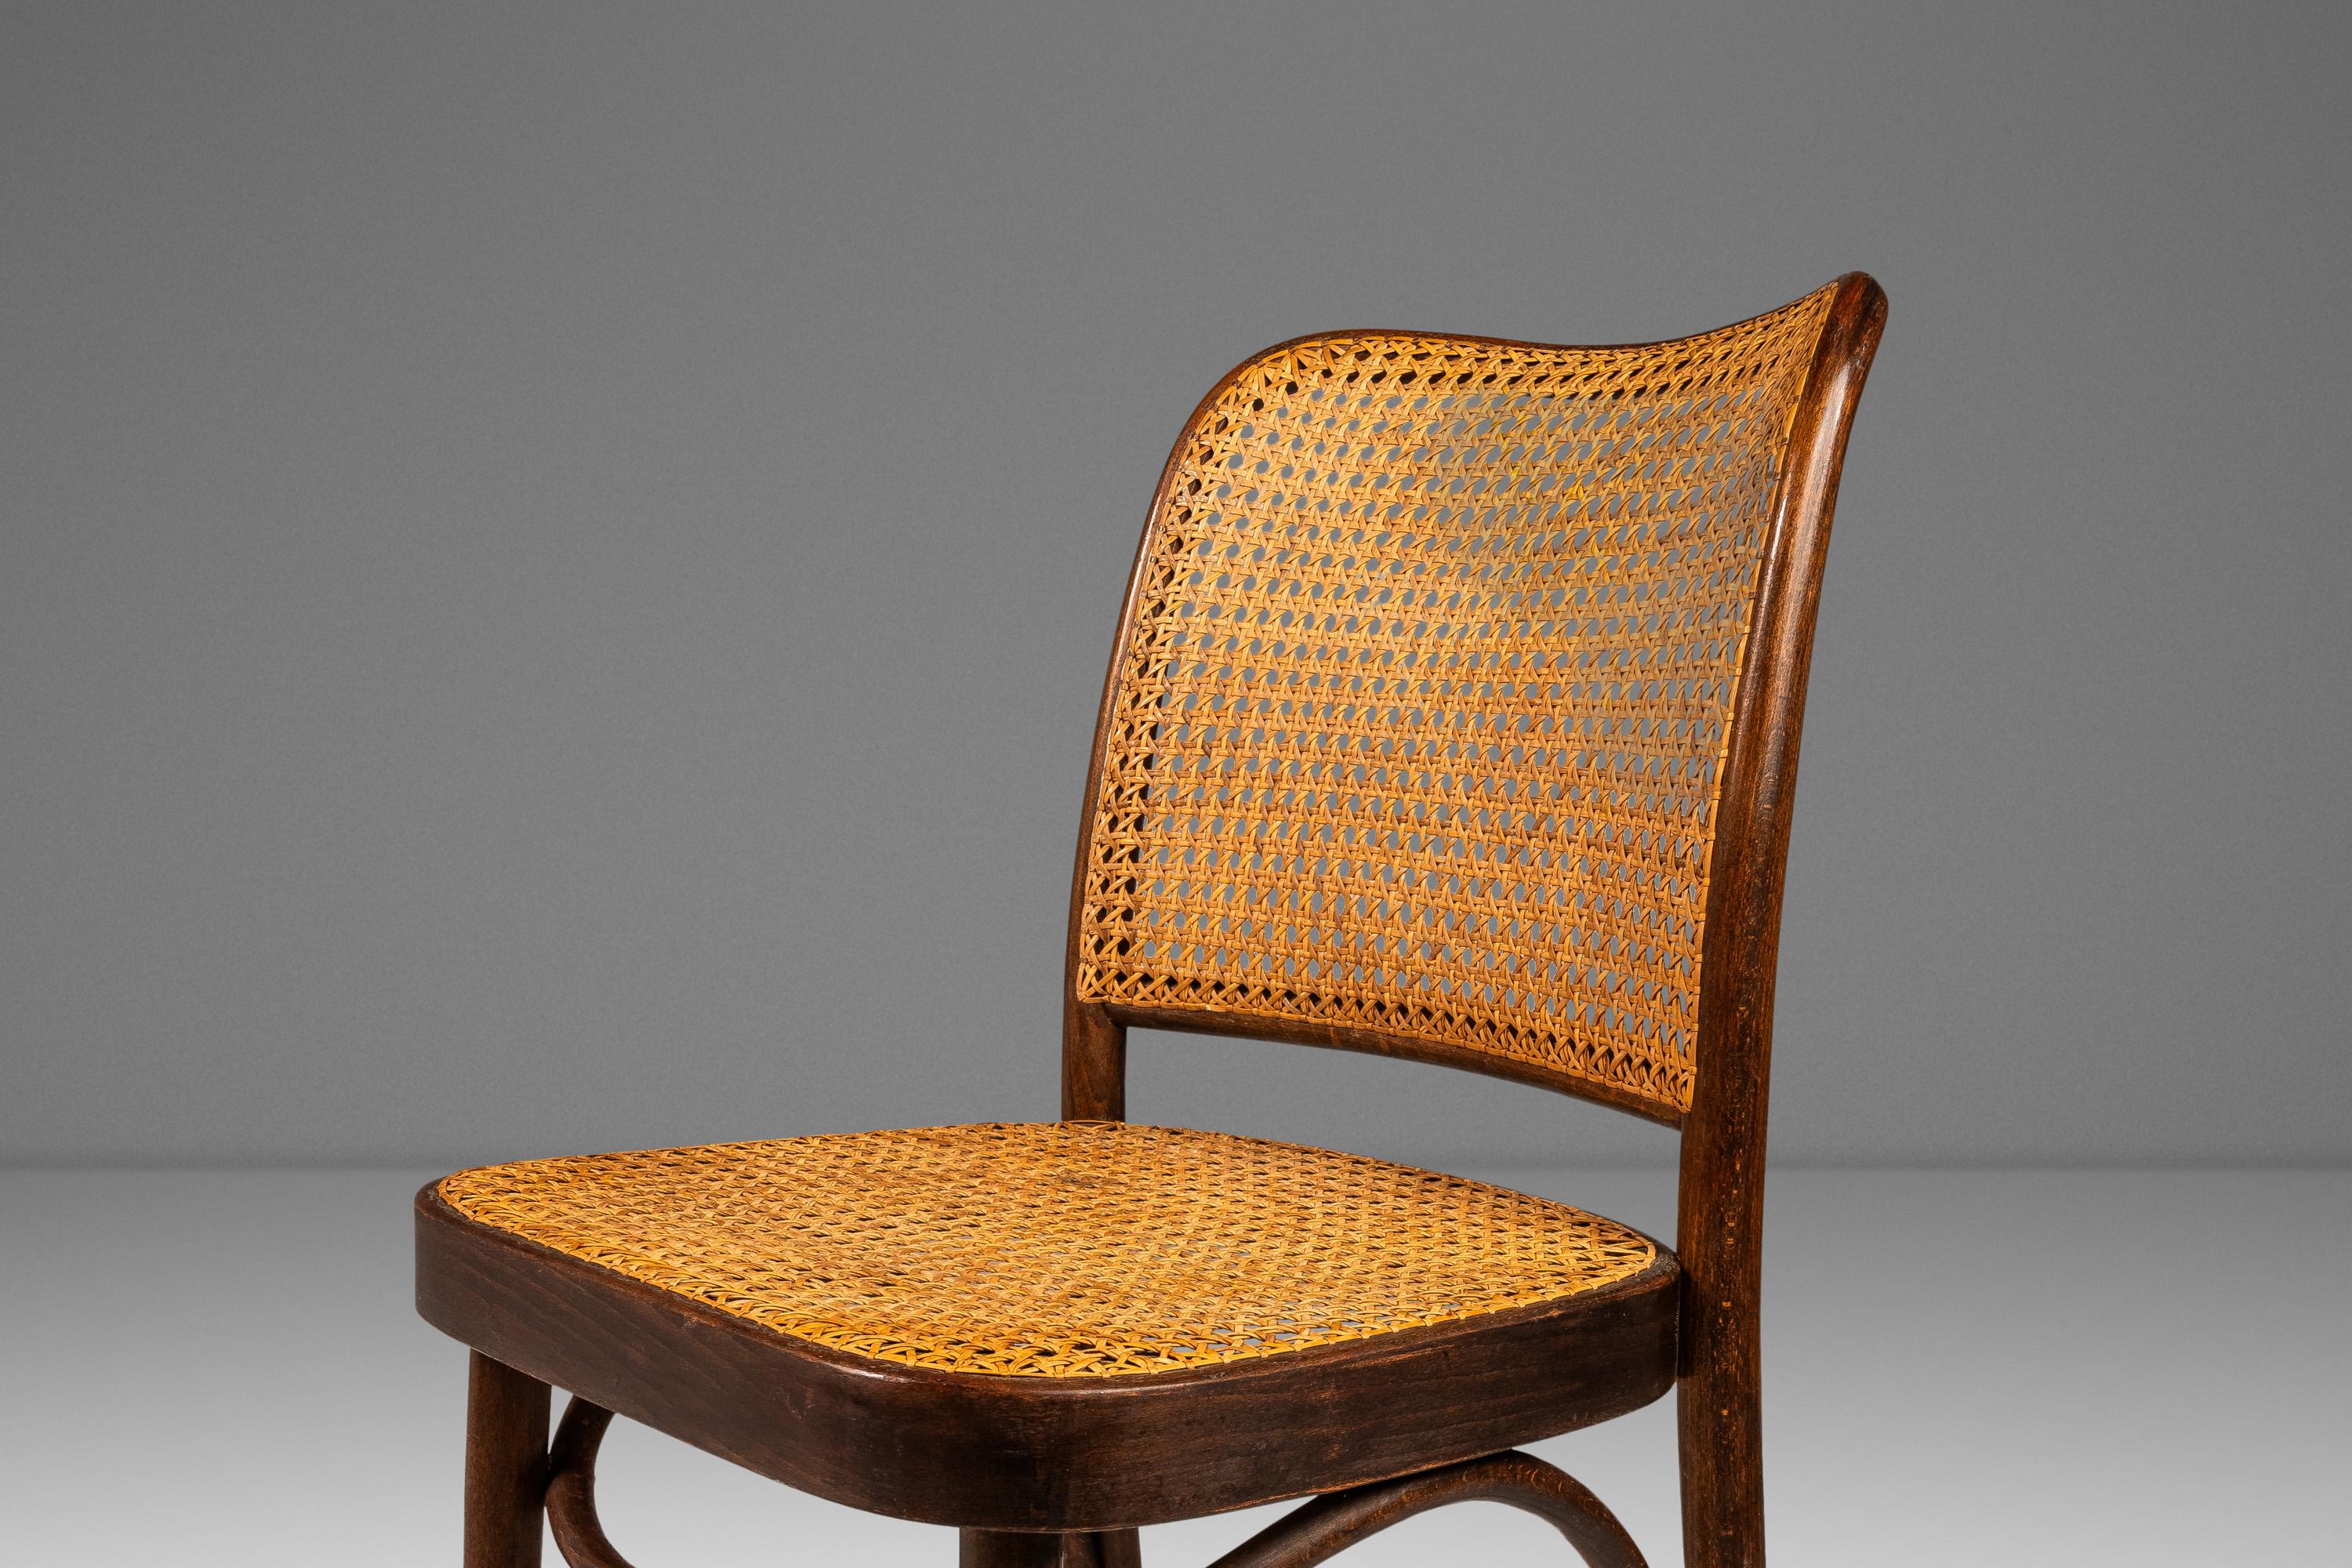 Bentwood Prague Model 811 Chair in Walnut by Josef Frank, Poland, c. 1960s For Sale 11